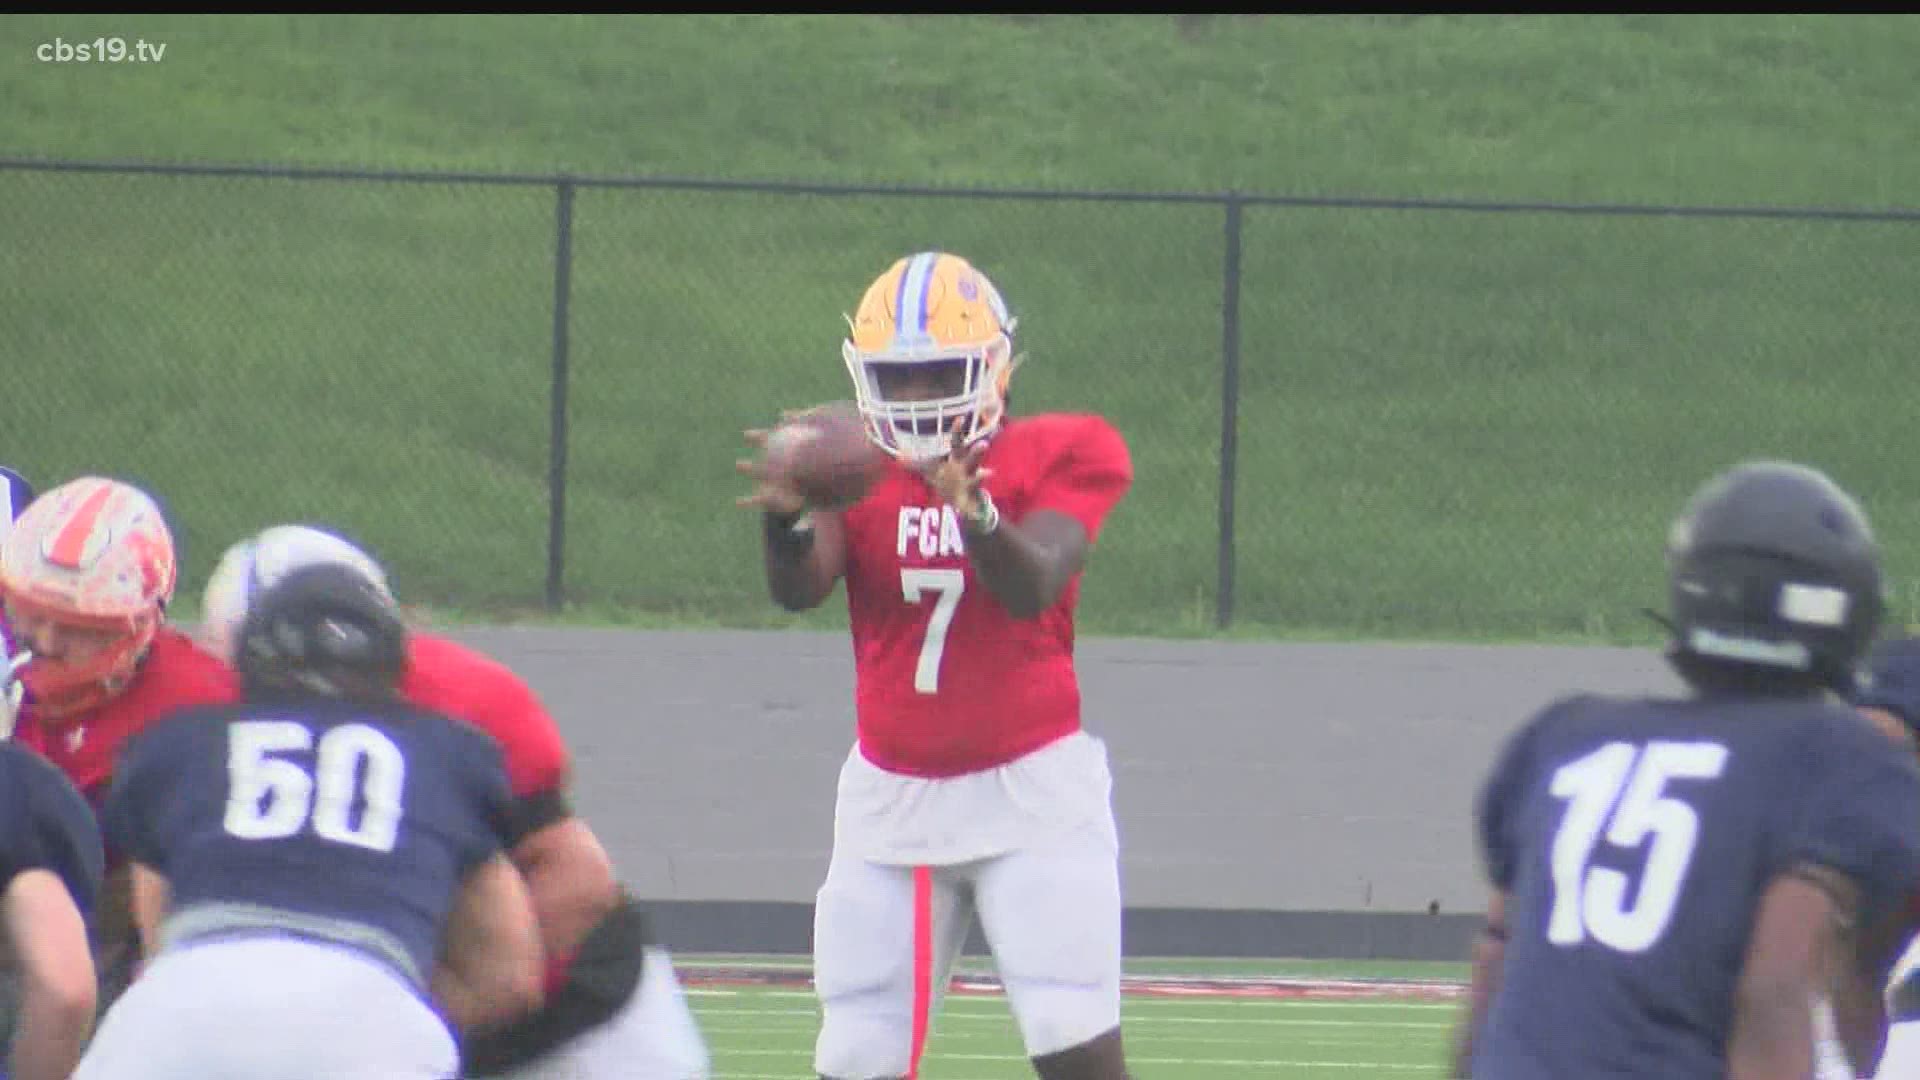 After FCA All-Star weekend was canceled a year ago due to the Pandemic, this year, the games are back and this East Texas tradition rolls along.